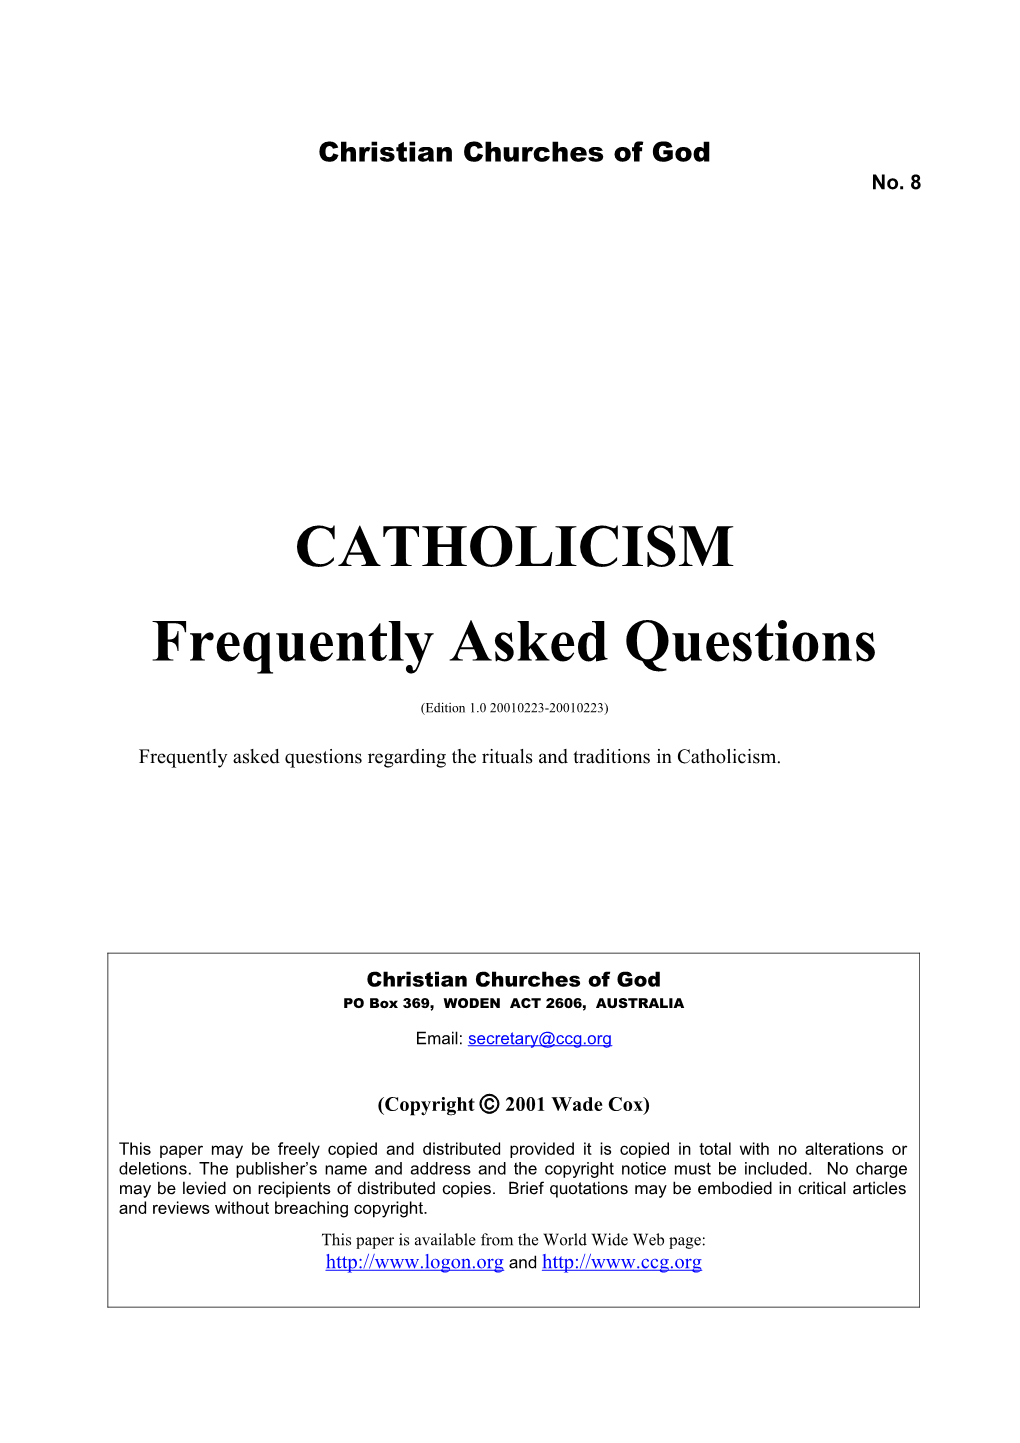 Catholicism Frequently Asked Questions (No. 8)